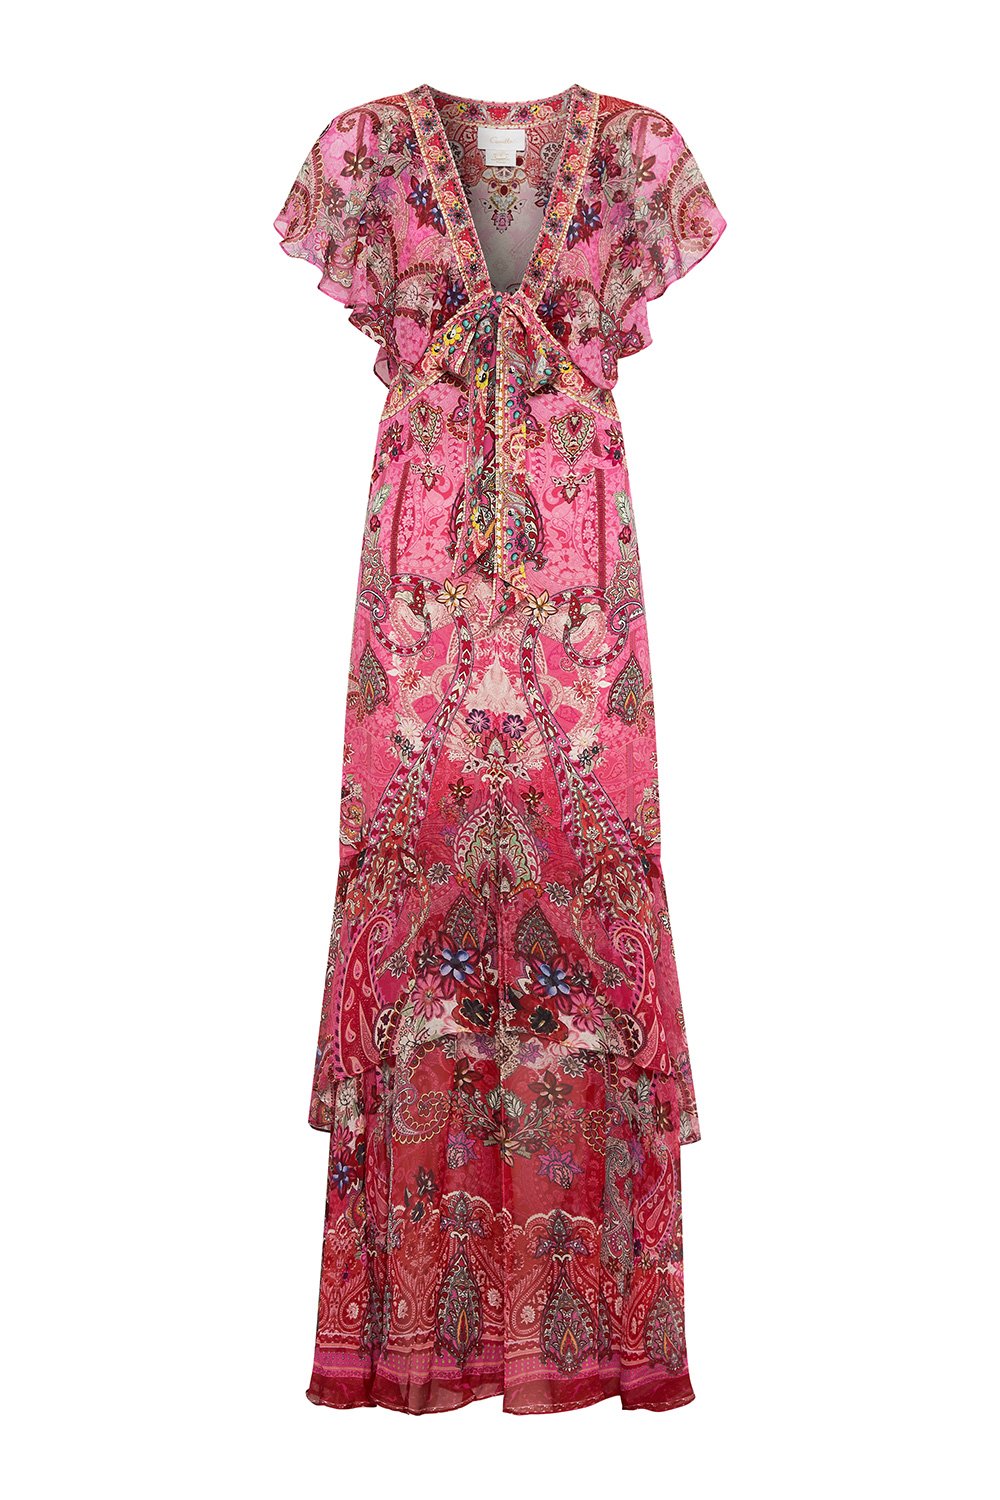 TIE FRONT MAXI WITH CENTRE FRONT SPLIT PALISADES PAISLEY